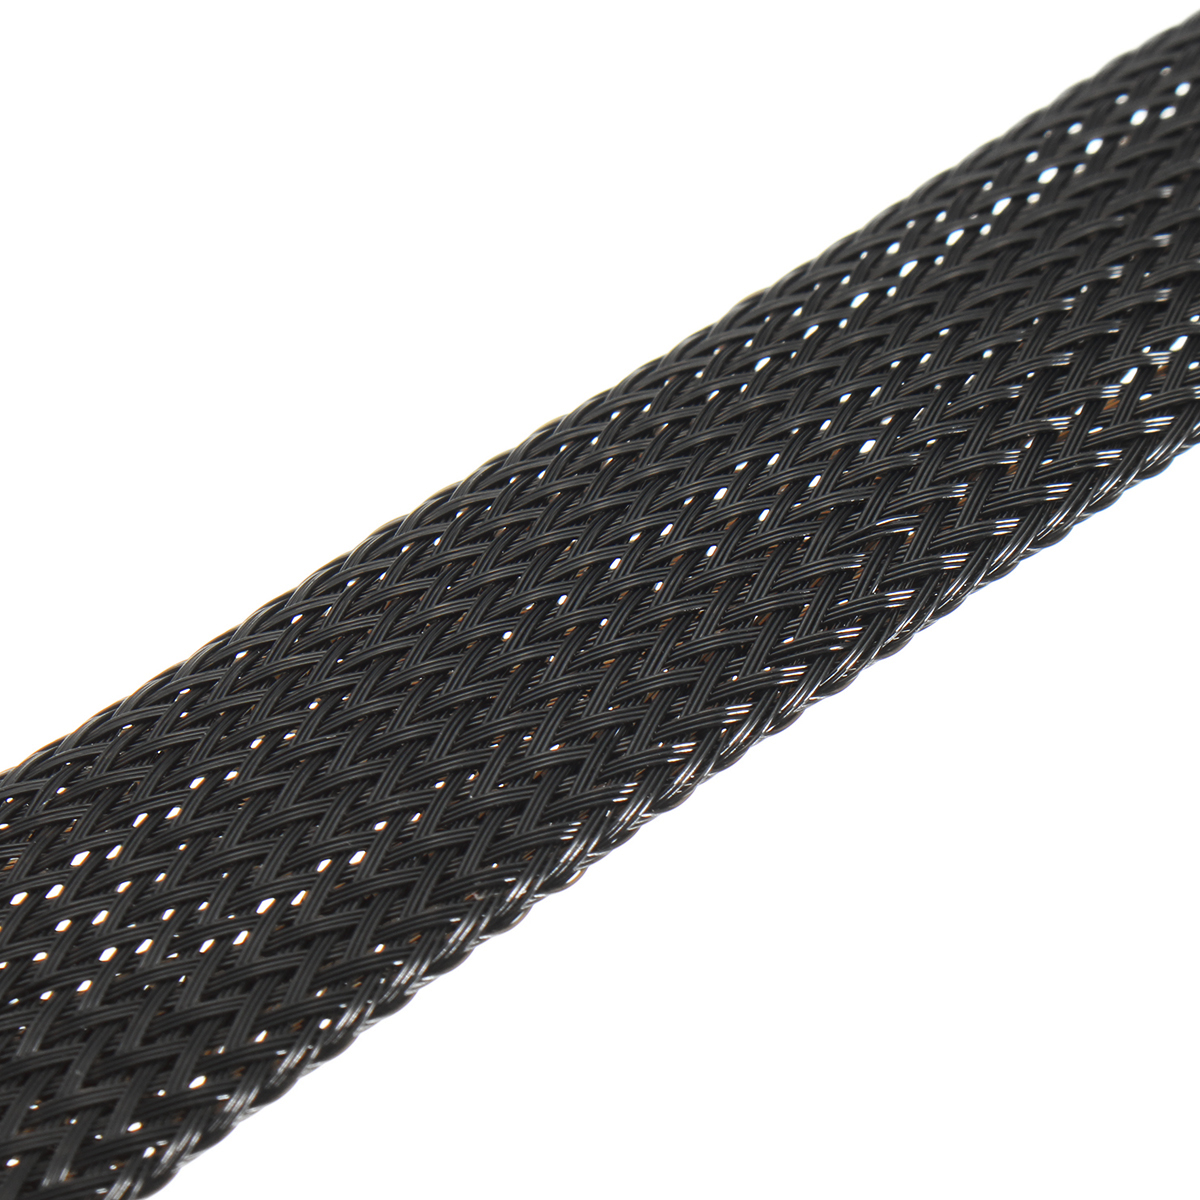 6m-8mm10mm12mm15mm20mm-Wire-Cable-Sheathing-Expandable-Sleeving-Braided-Loom-Tubing-Black-1179628-1